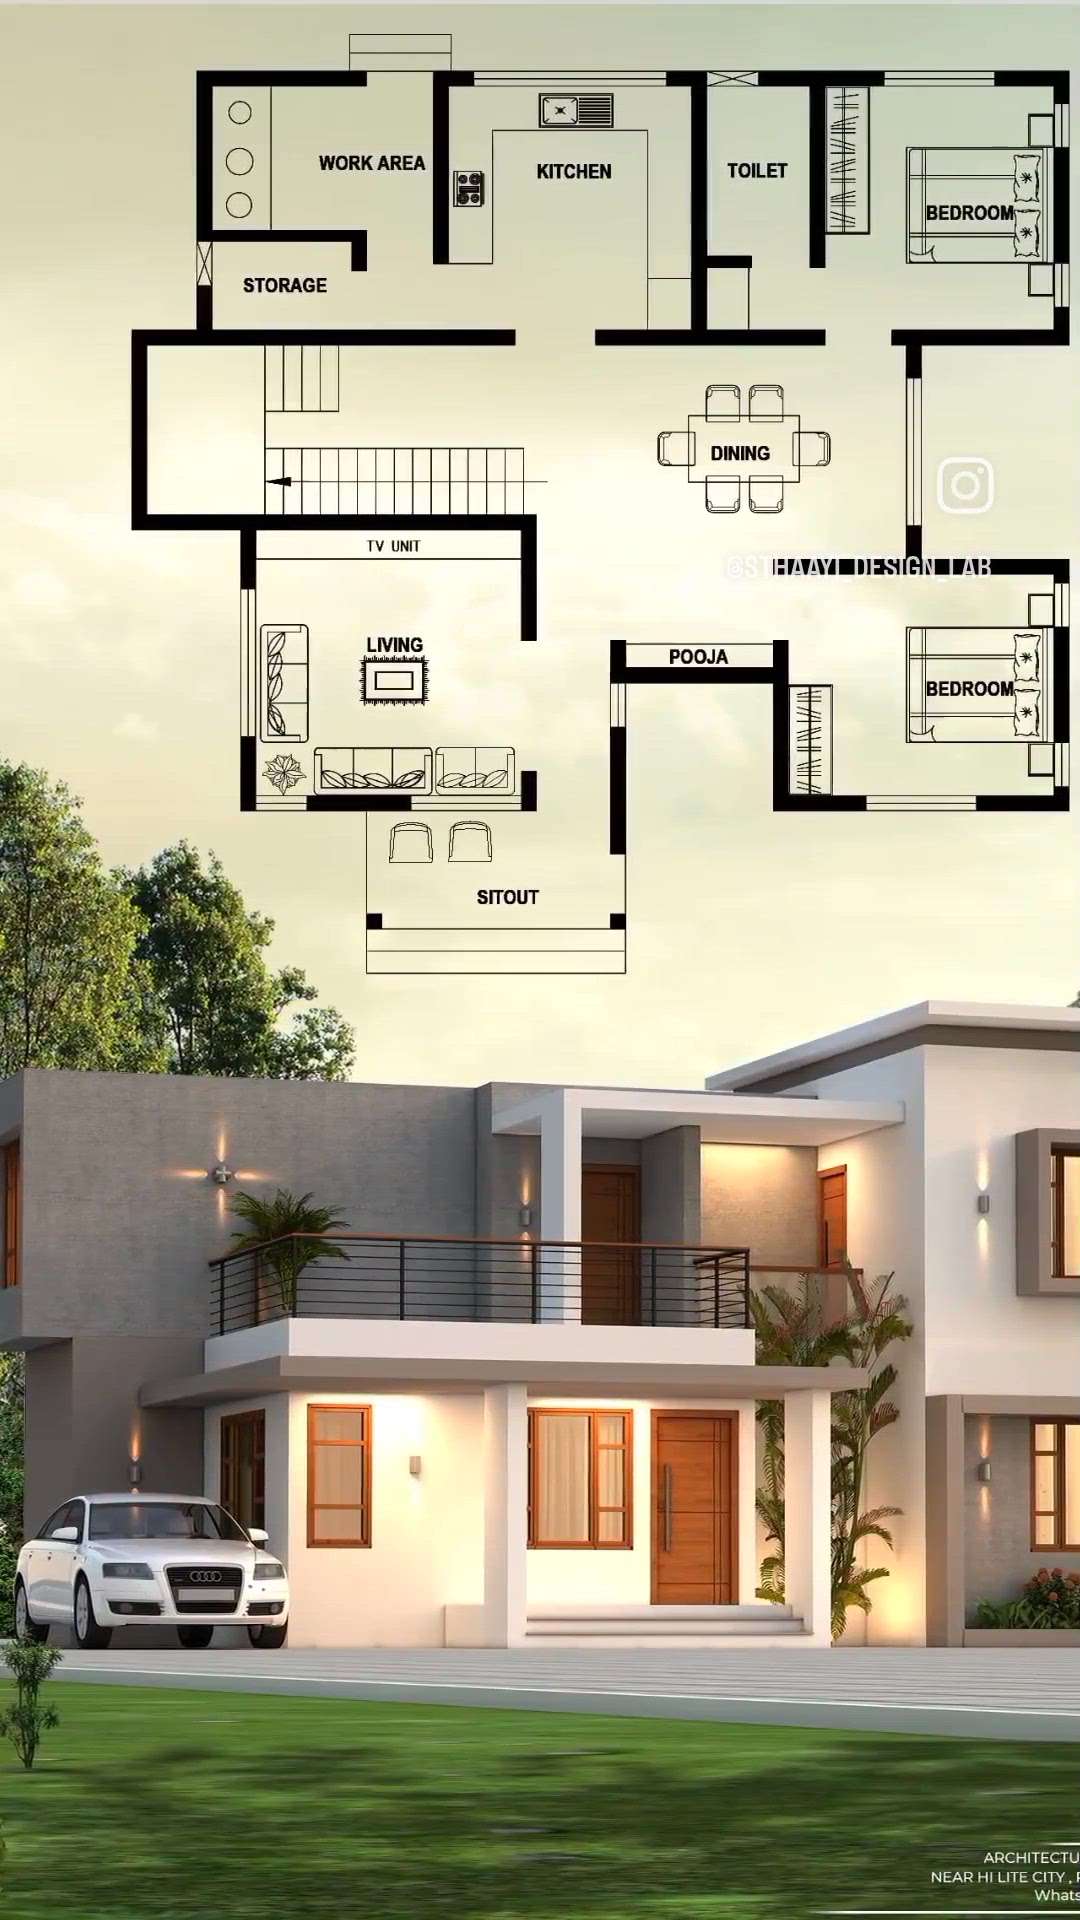 Budget Home Plan 🏡 3BHK
Area : GF - 1228 sq.ft
Area : FF -  588 sq.ft
Total : 1816 sq.ft

Ground Floor 
● Sitout 
● Living 
● Dining 
● Prayer
● 1st Bedroom attached with Dressing 
● 2nd Bedroom | C-toilet below stair
● Kitchen 
● Work area 
● Store room

First Floor 
● 1Master Bedroom Attached with Dressing and Bedroom Balcony 
● Hall 
● Open Terrace 1 front For Patio purpose 
● Open Terrace 2 Back For Laundry purpose 

.
.
.
#sthaayi_design_lab
#sthaayi #homedecor #floorplan | #architecture | #architecturaldesign | #housedesign | #buildingdesign | #designhouse | #designerhouse | #interiordesign | #construction | #newconstruction | #civilengineering | #realestate #kerala #budgethome #keralahomes